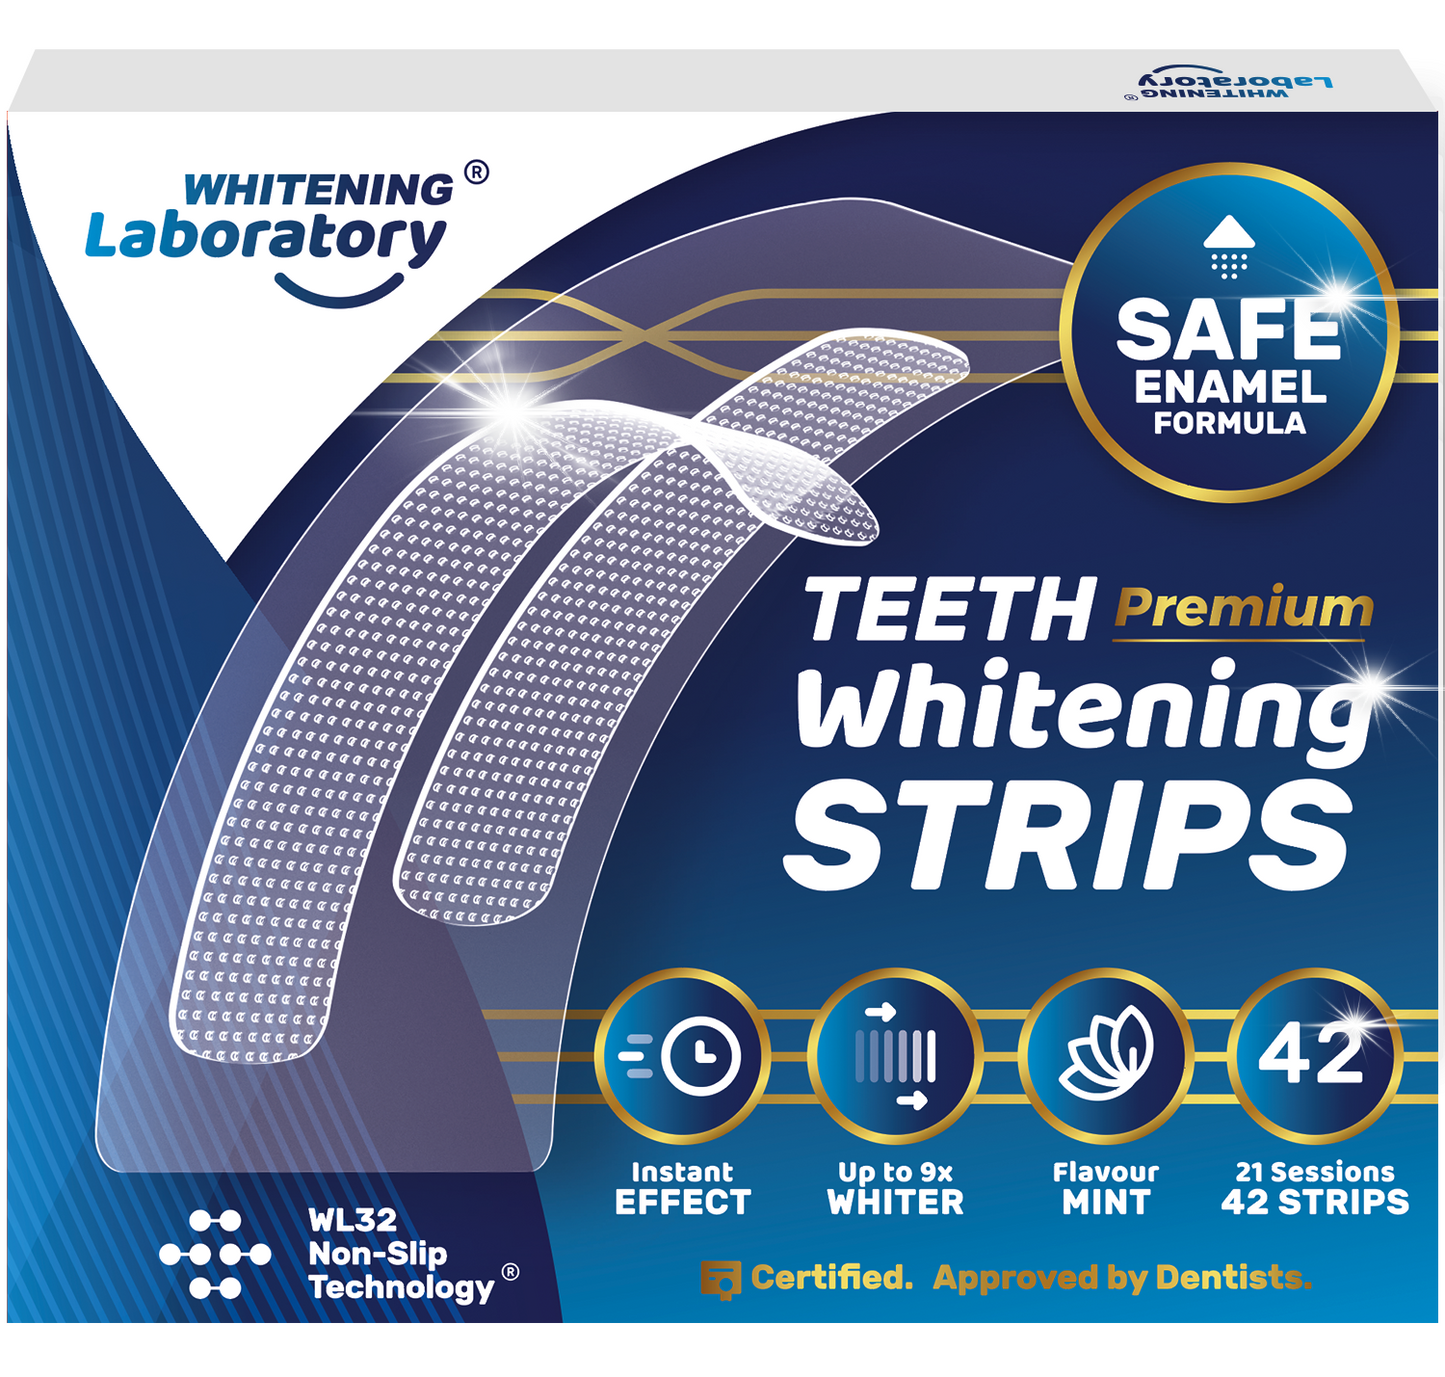 Box of Premium Teeth Whitening Strips by Whitening Laboratory for sensitive teeth with PAP+ formula.